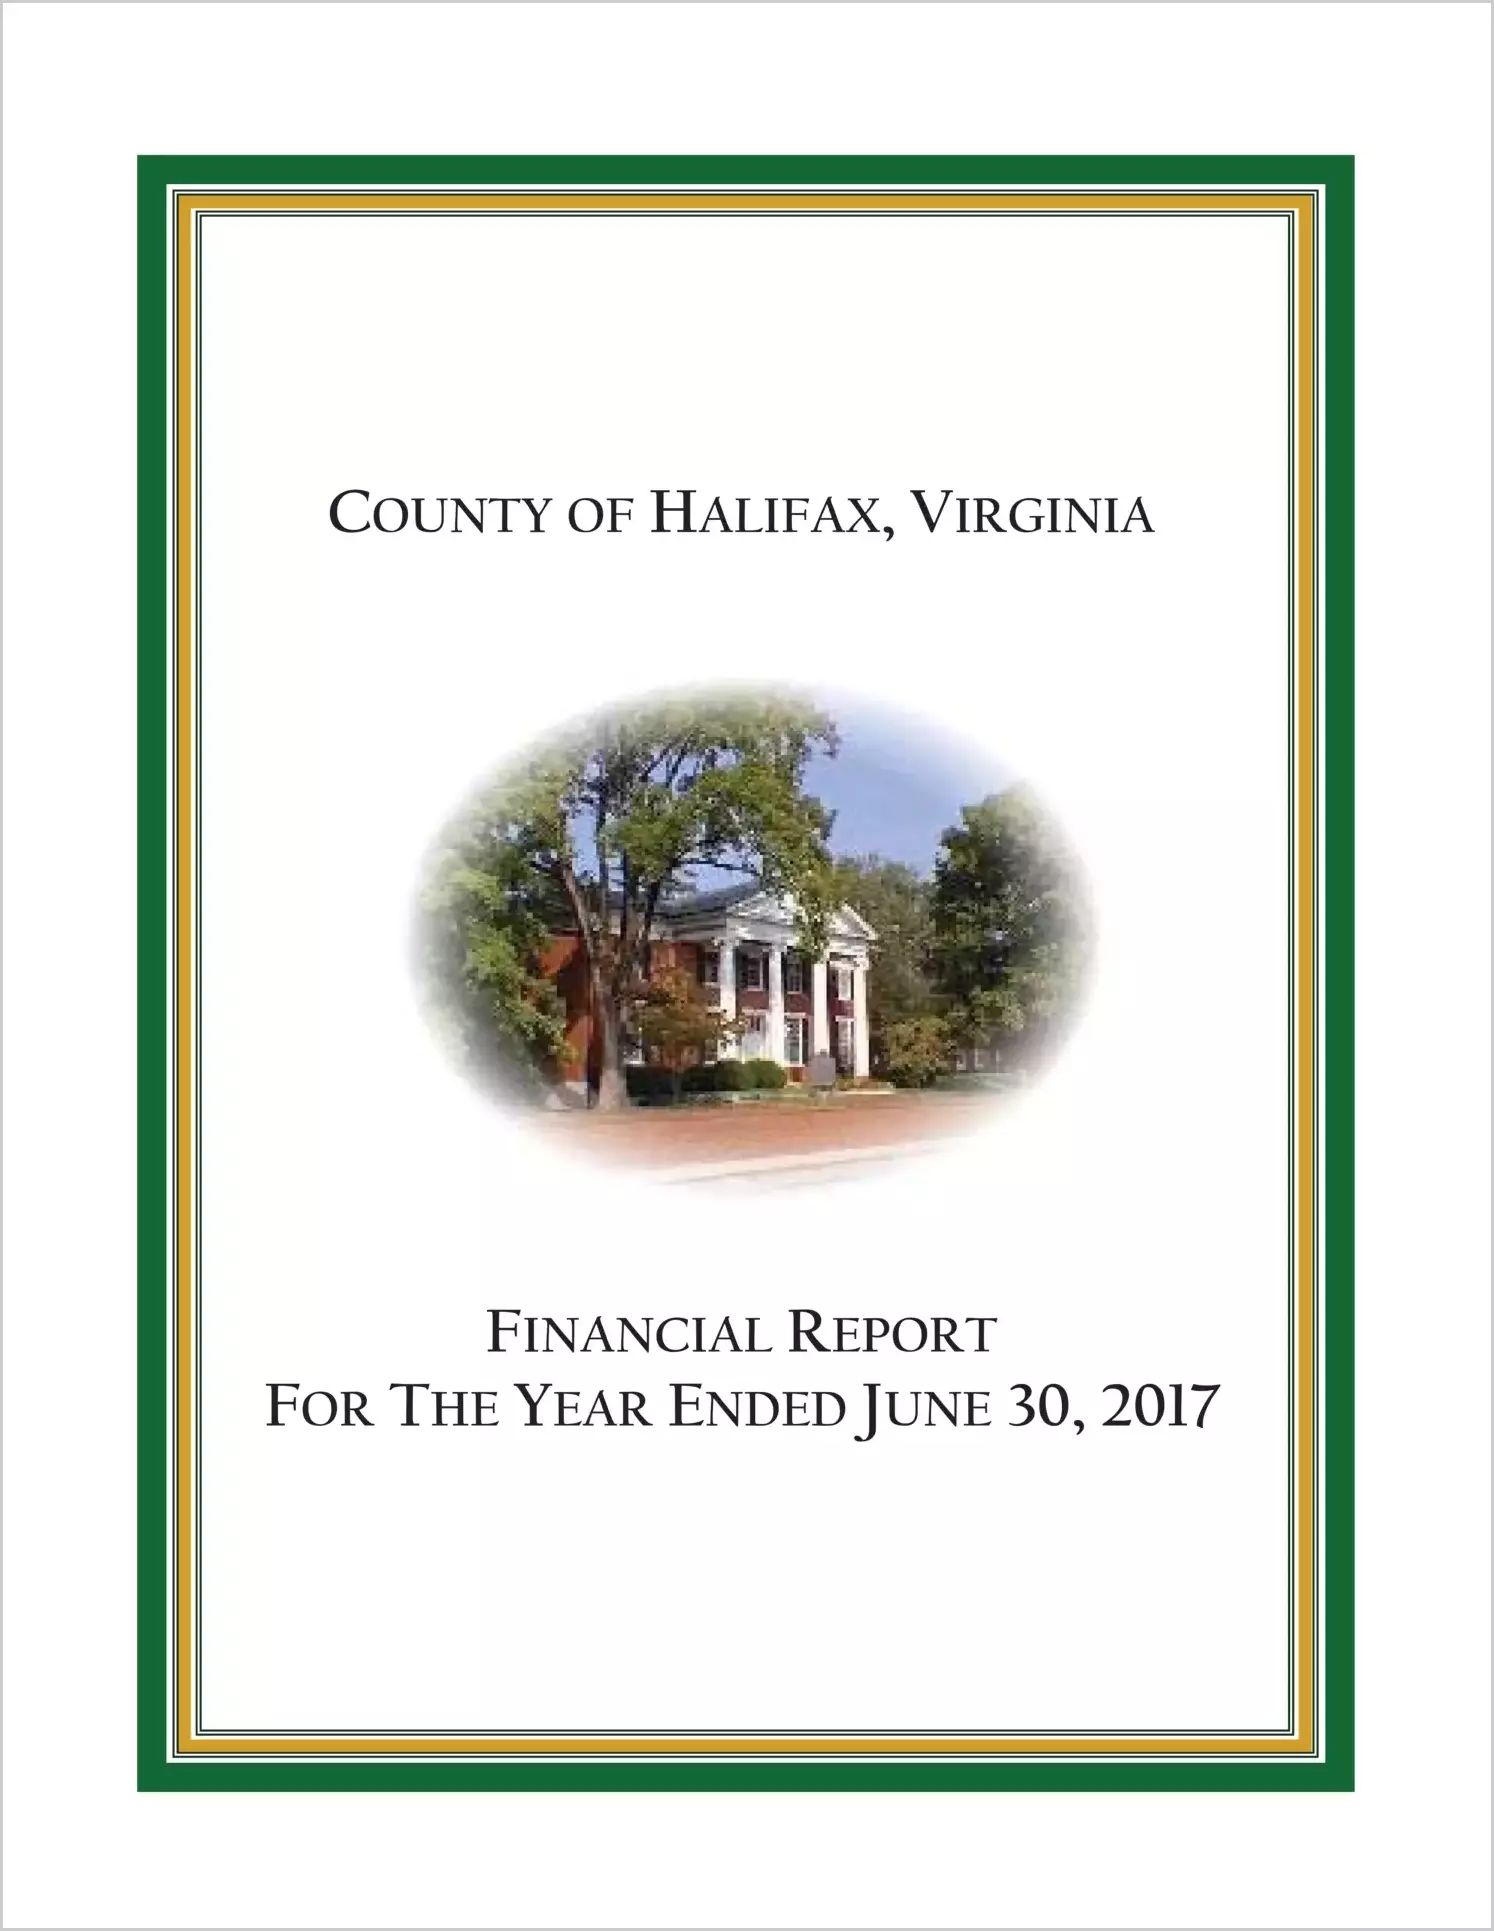 2017 Annual Financial Report for County of Halifax